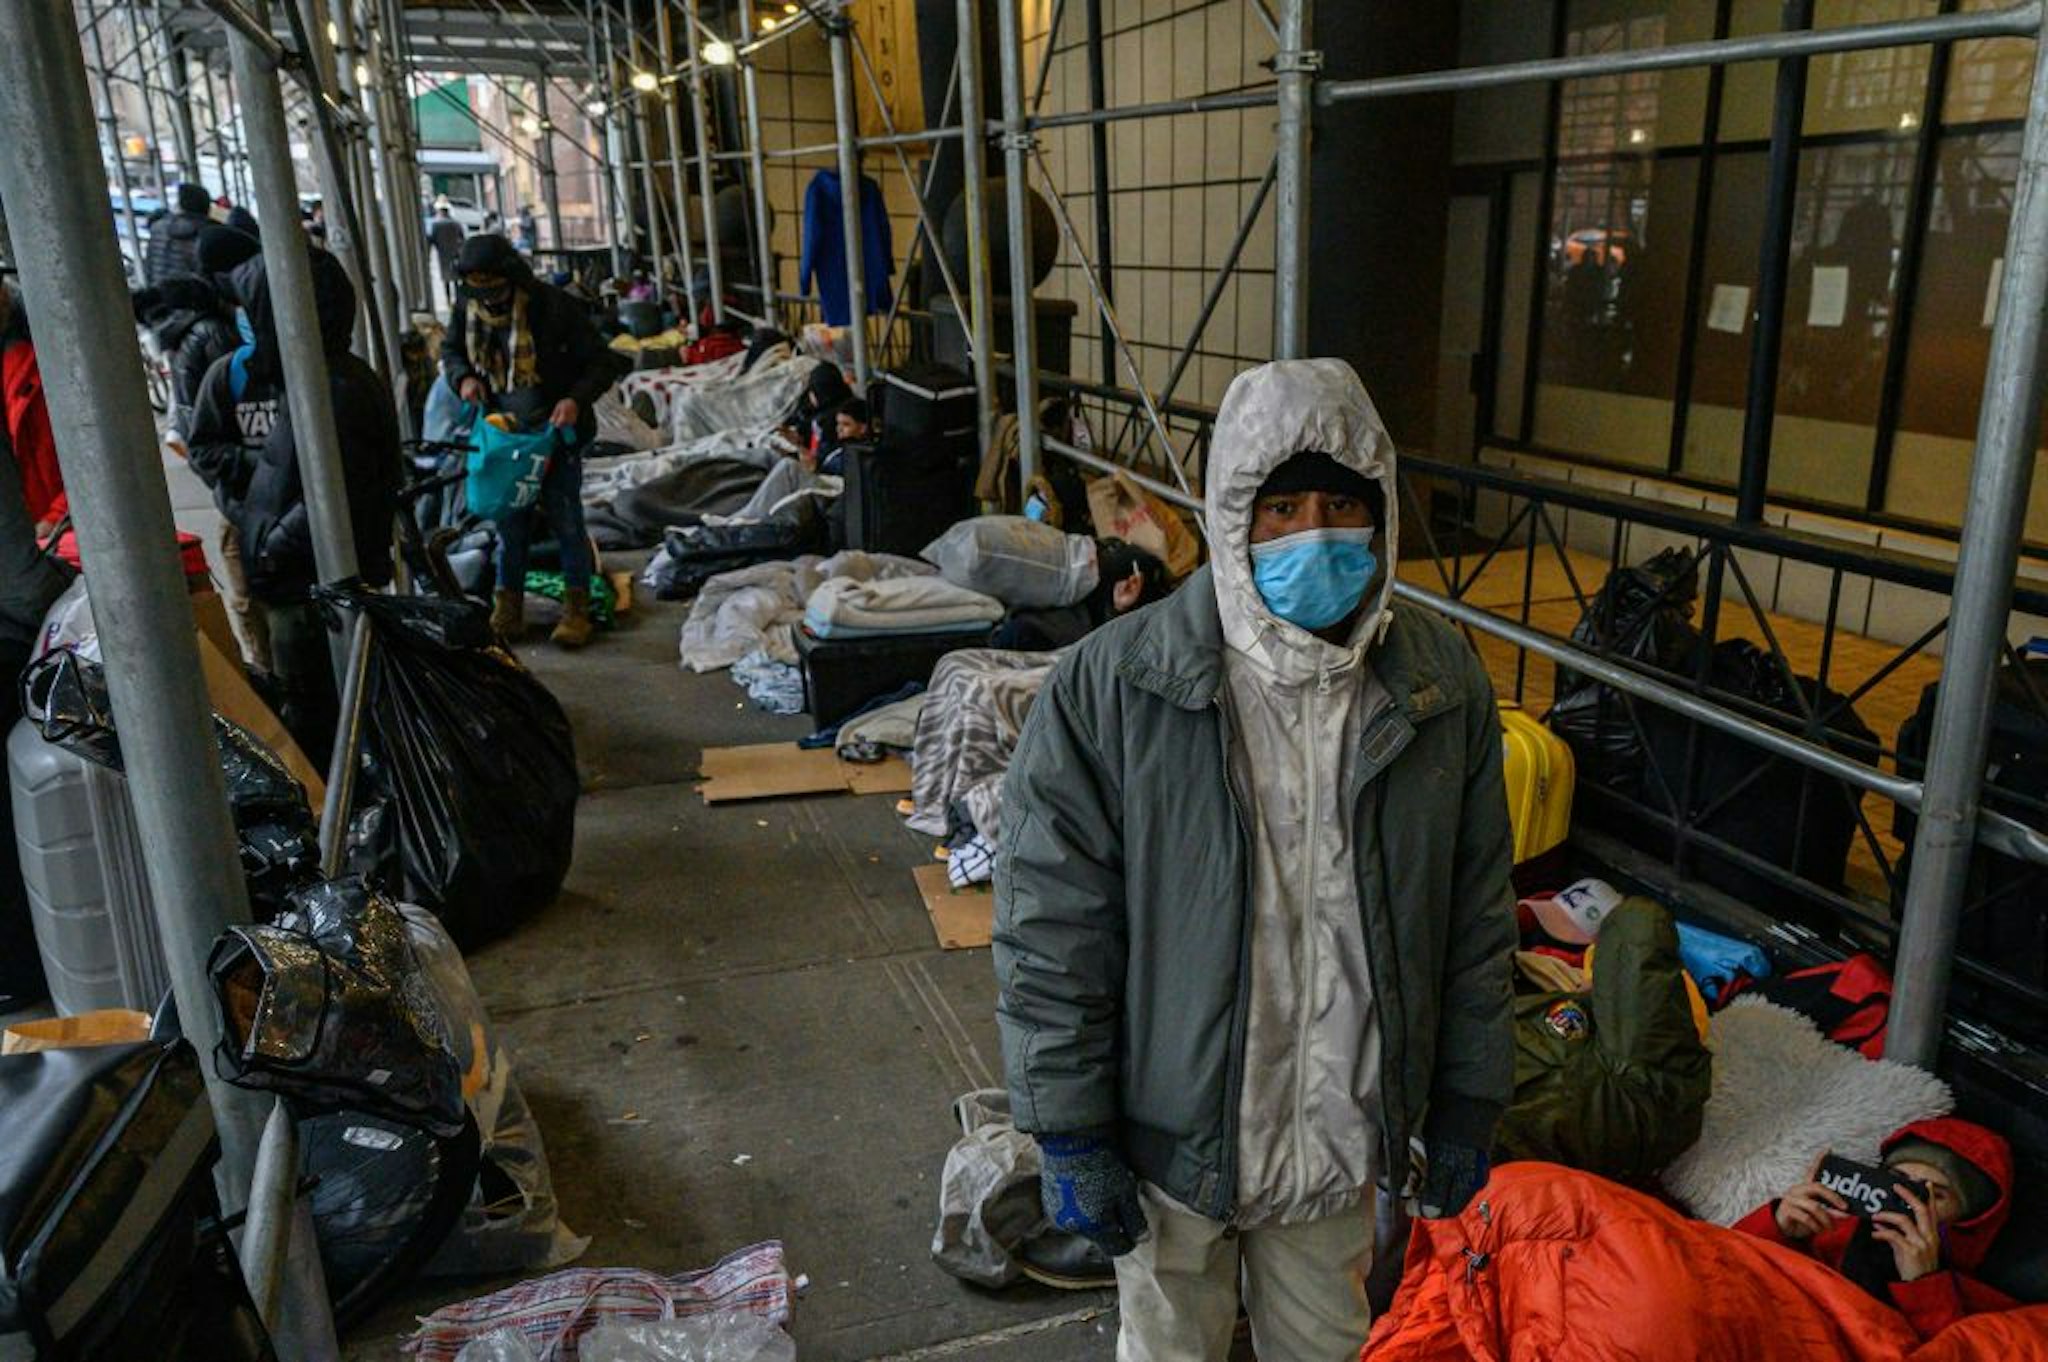 TOPSHOT - Migrants camp outside a hotel where they had previously been housed, as they resist efforts by the city to relocate them to a Brooklyn facility for asylum seekers, in the Hells Kitchen neighborhood of New York on January 31, 2023. - The Brooklyn facility is the city's fifth relief center amid a continued influx of asylum seekers, according to local media. (Photo by Ed JONES / AFP) (Photo by ED JONES/AFP via Getty Images)